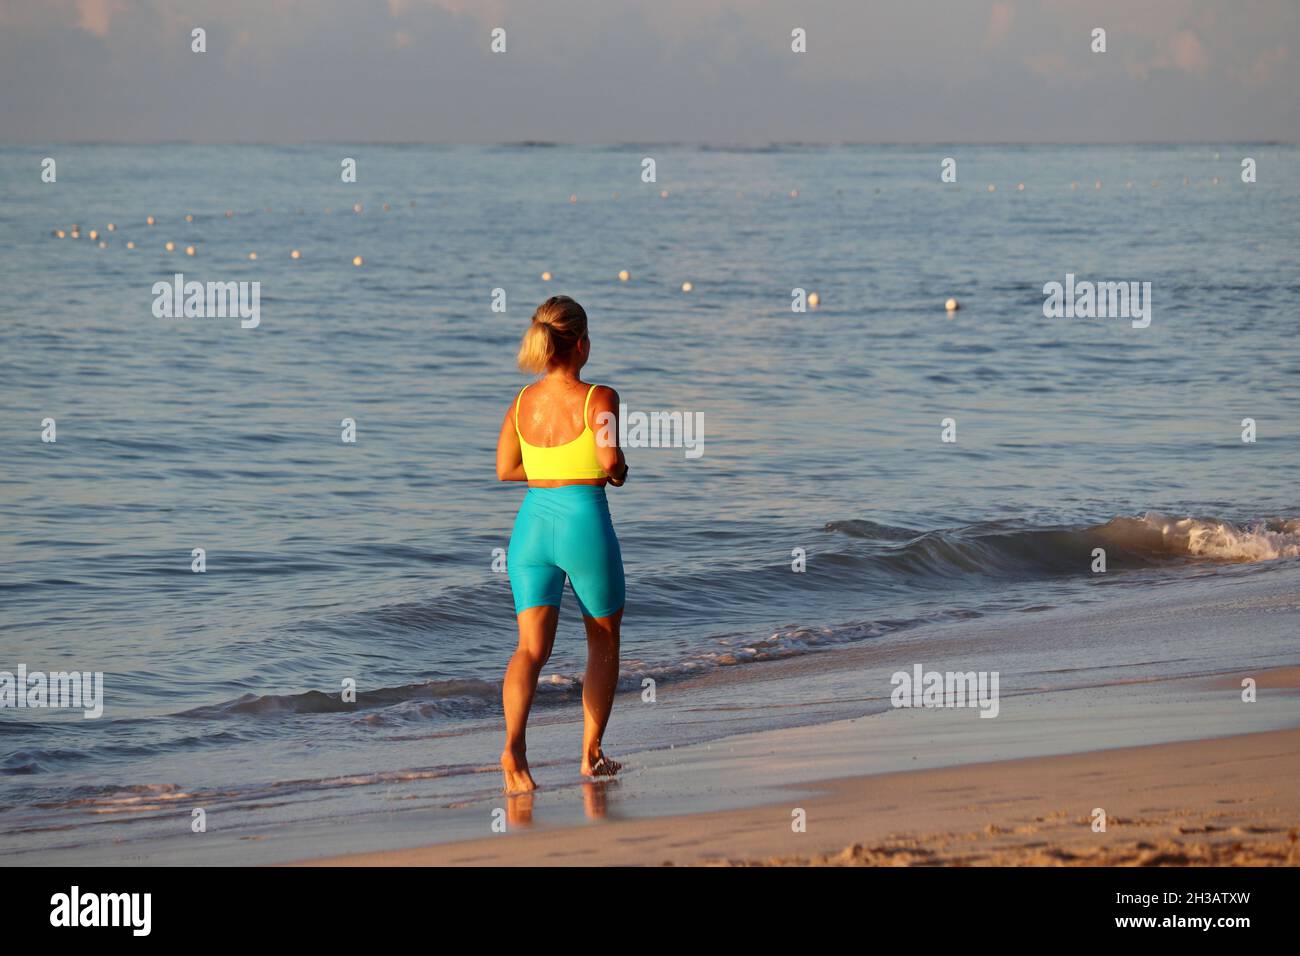 Barefoot woman in sportswear running by the sand in the sea waves. Workout on a beach at early morning, healthy lifestyle Stock Photo